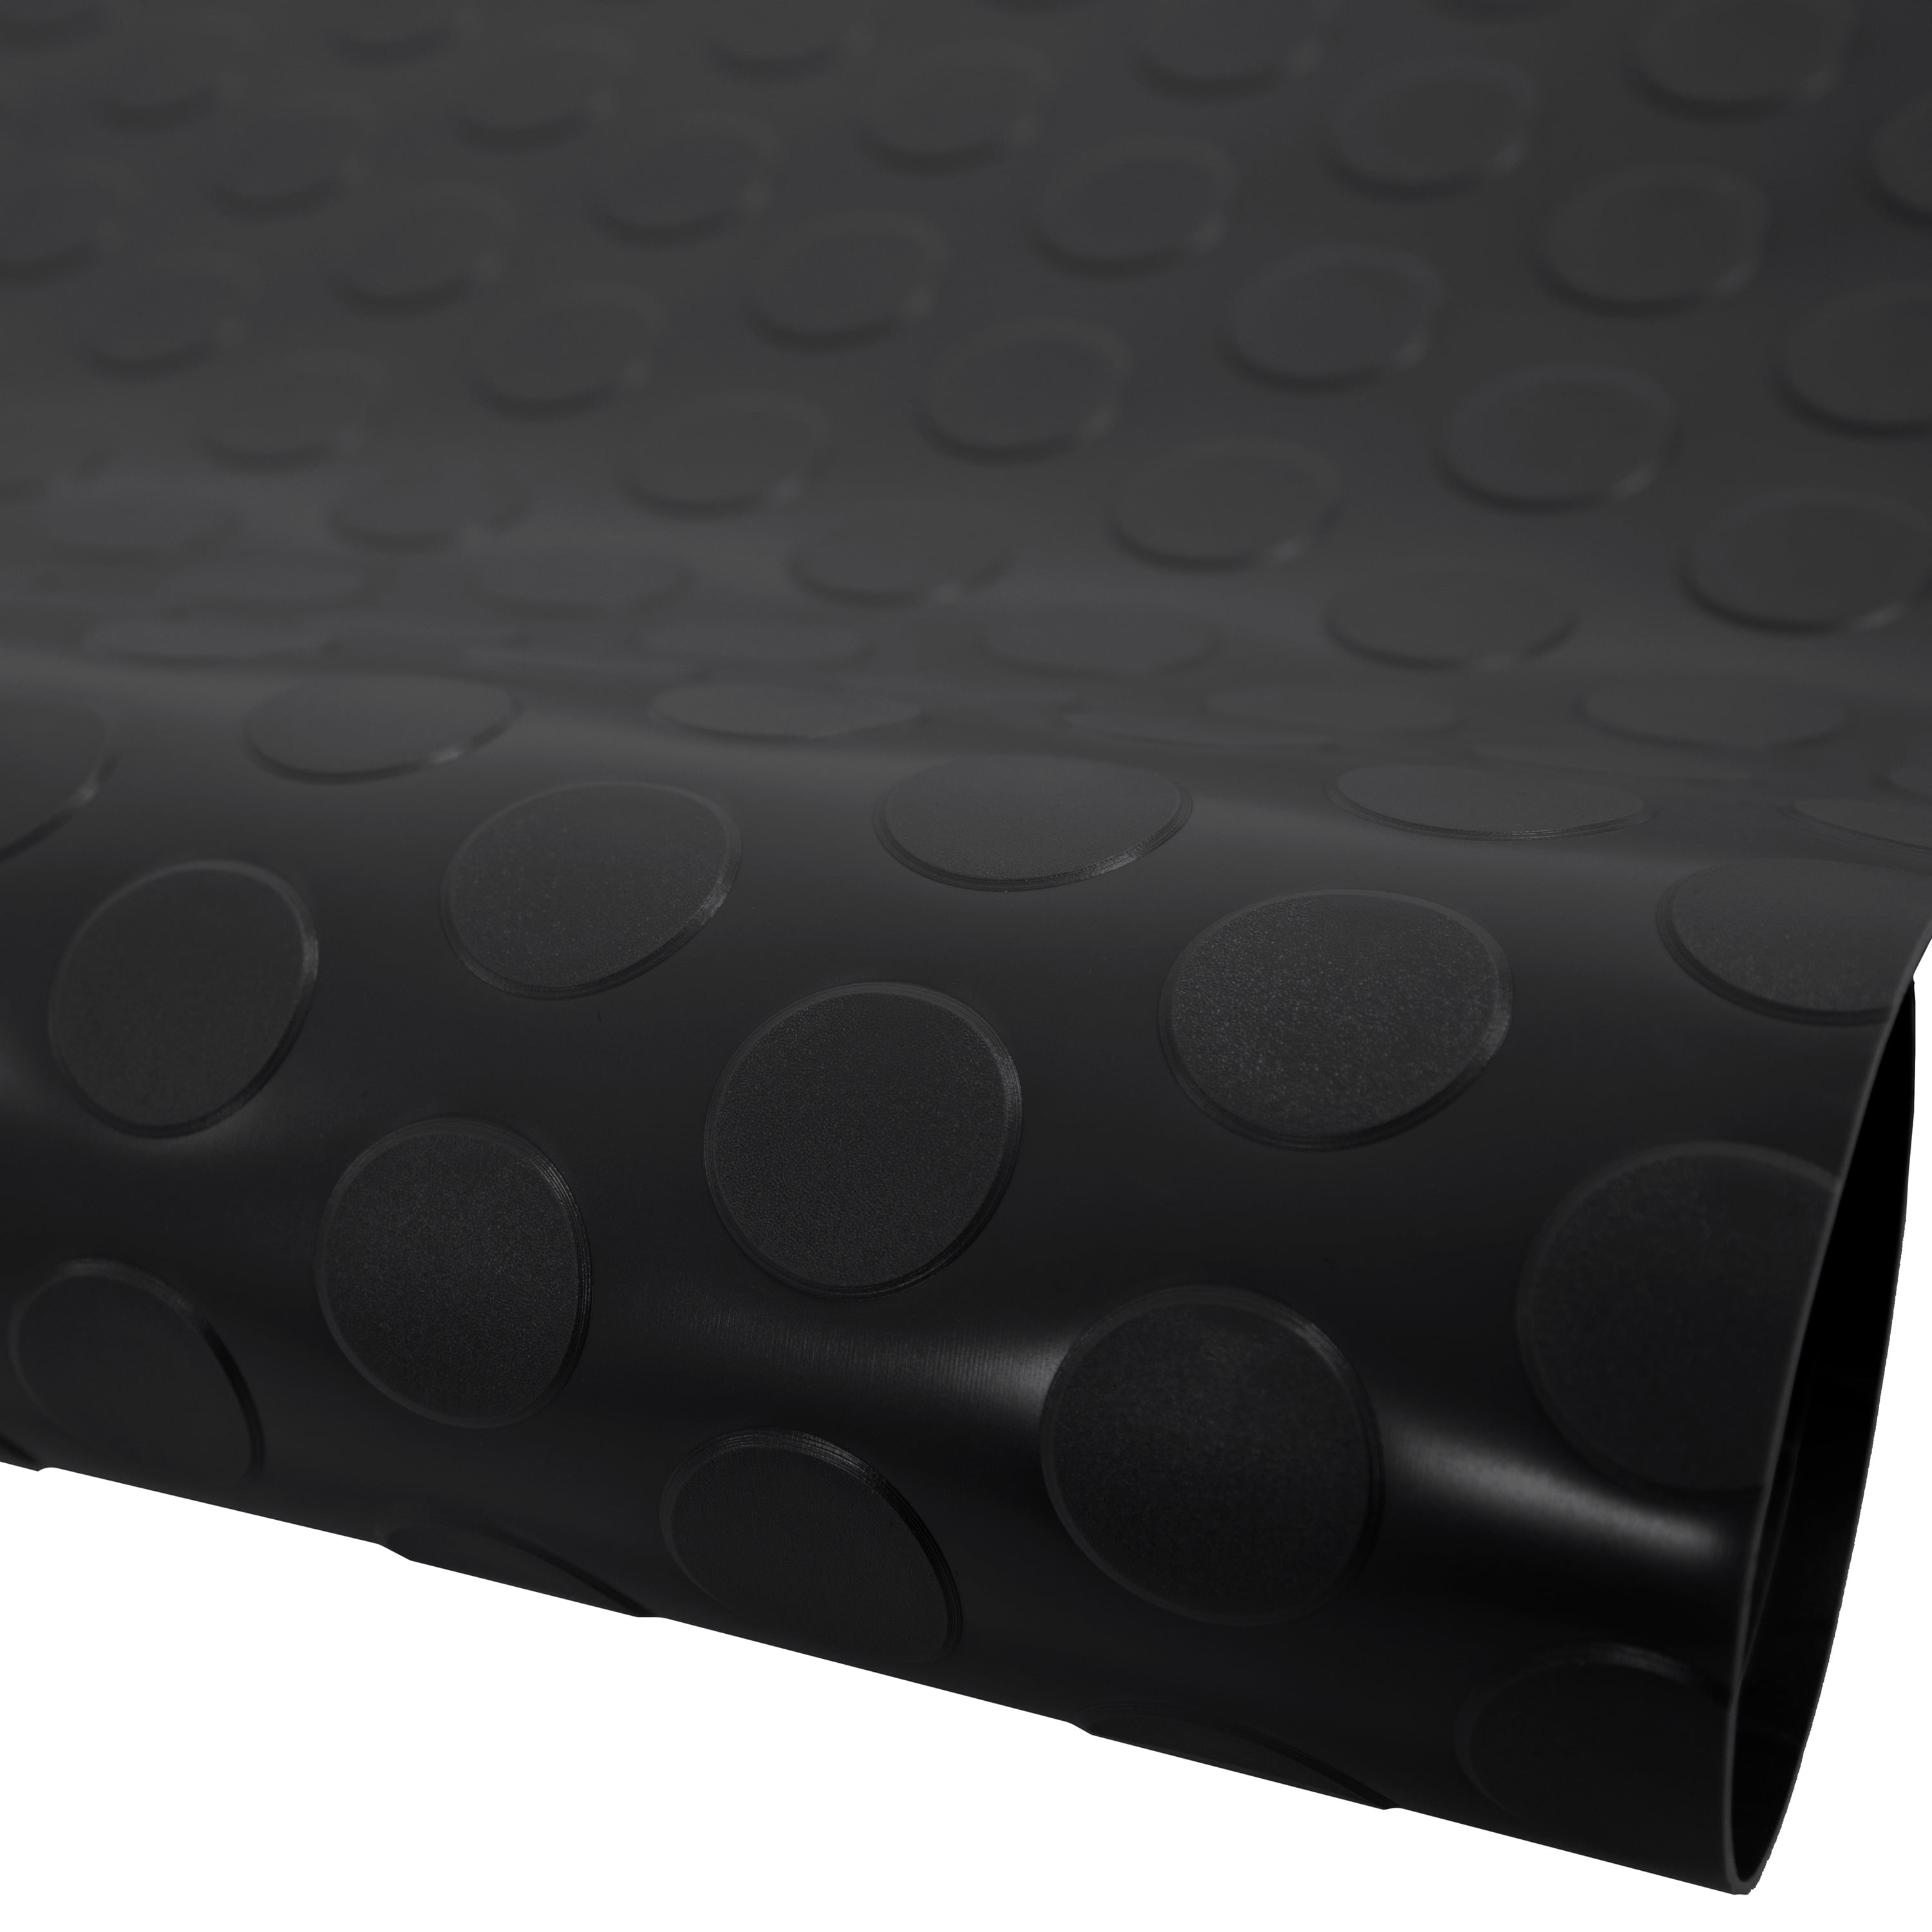 7.5 x 25, Coin Midnight Black IncStores Standard Grade Nitro Garage Roll Out Floor Protecting Parking Mats 